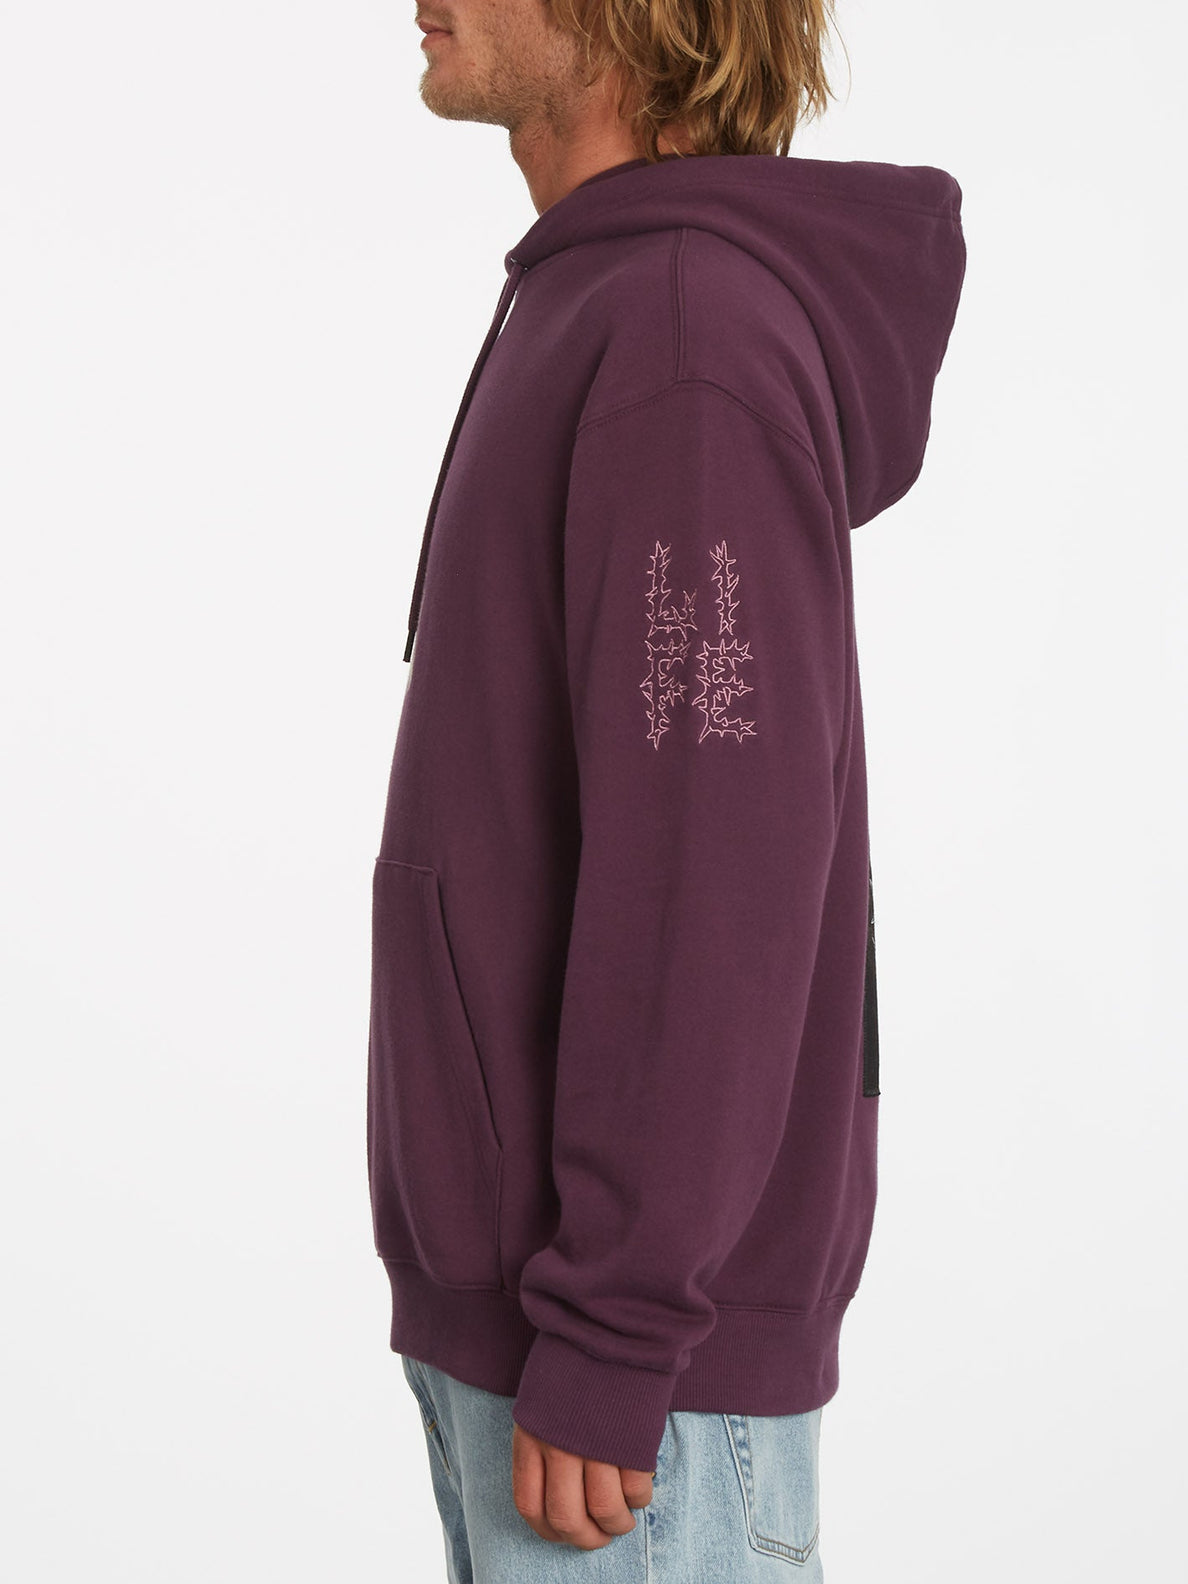 Vaderetro Hoodie - MULBERRY (A4132207_MUL) [1]